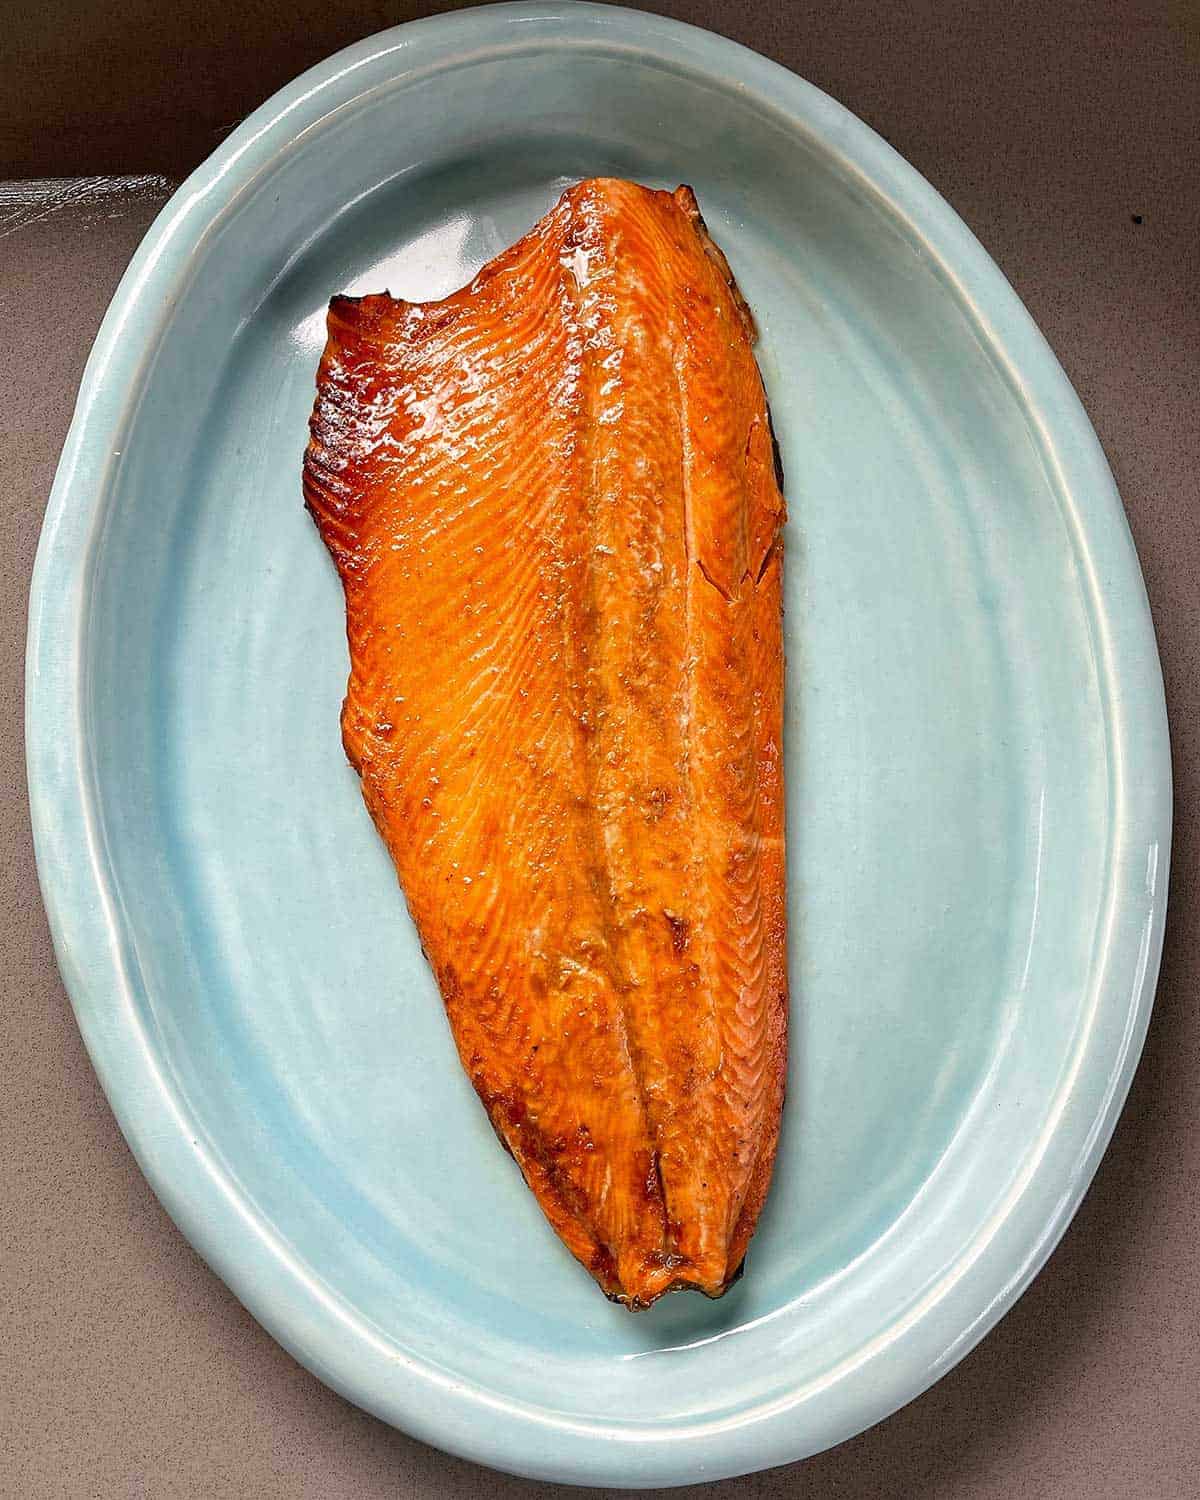 Cooked salmon on blue platter.